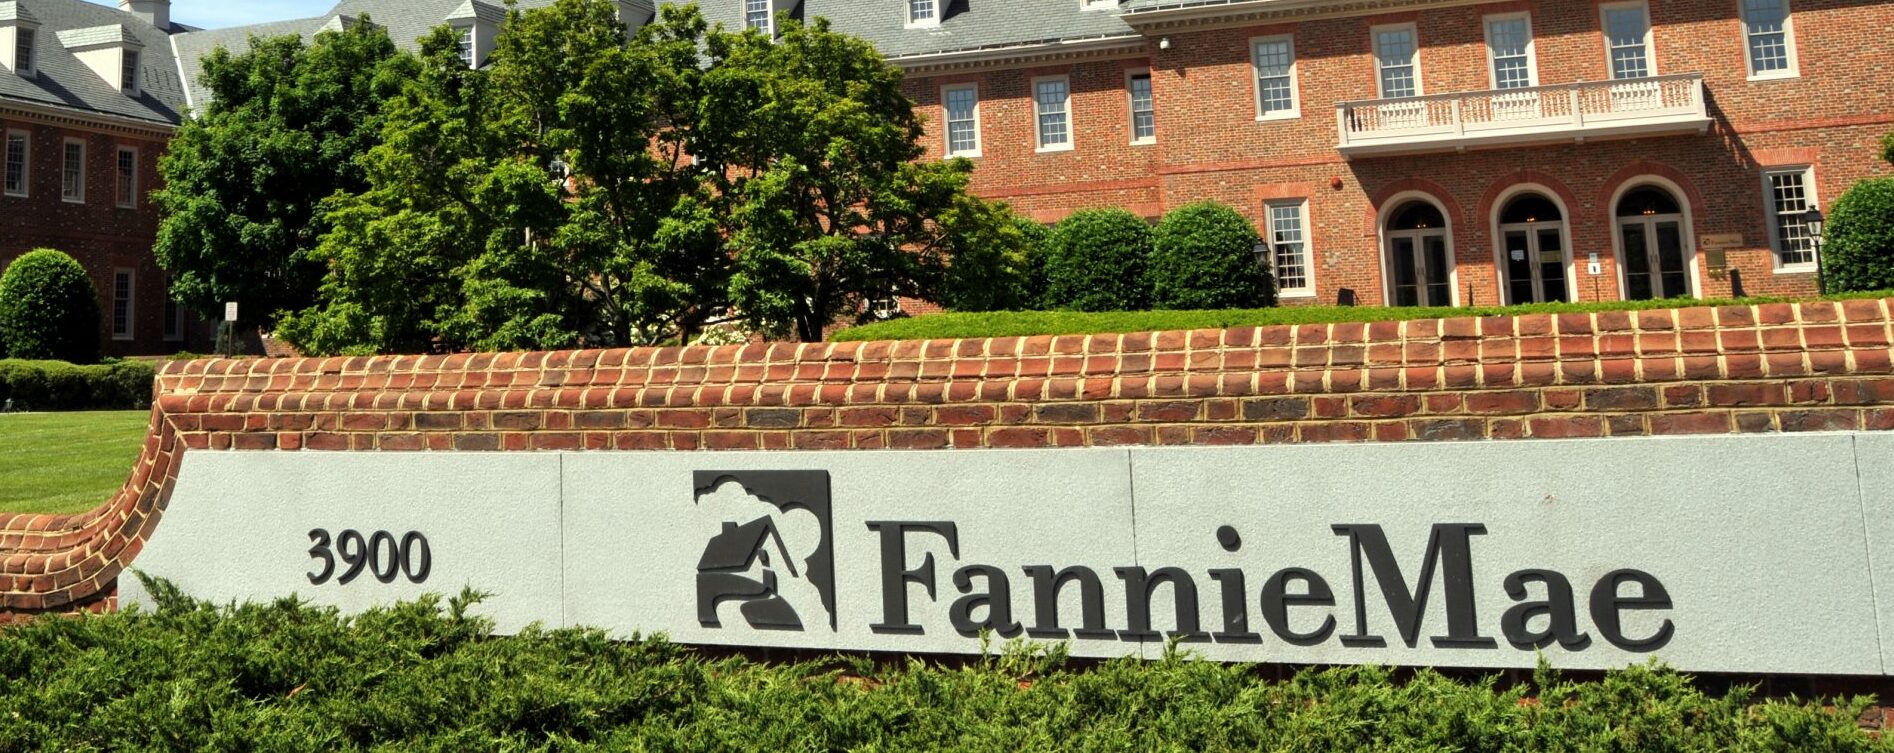 Fannie, Freddie Extend Ban On Foreclosures, Evictions